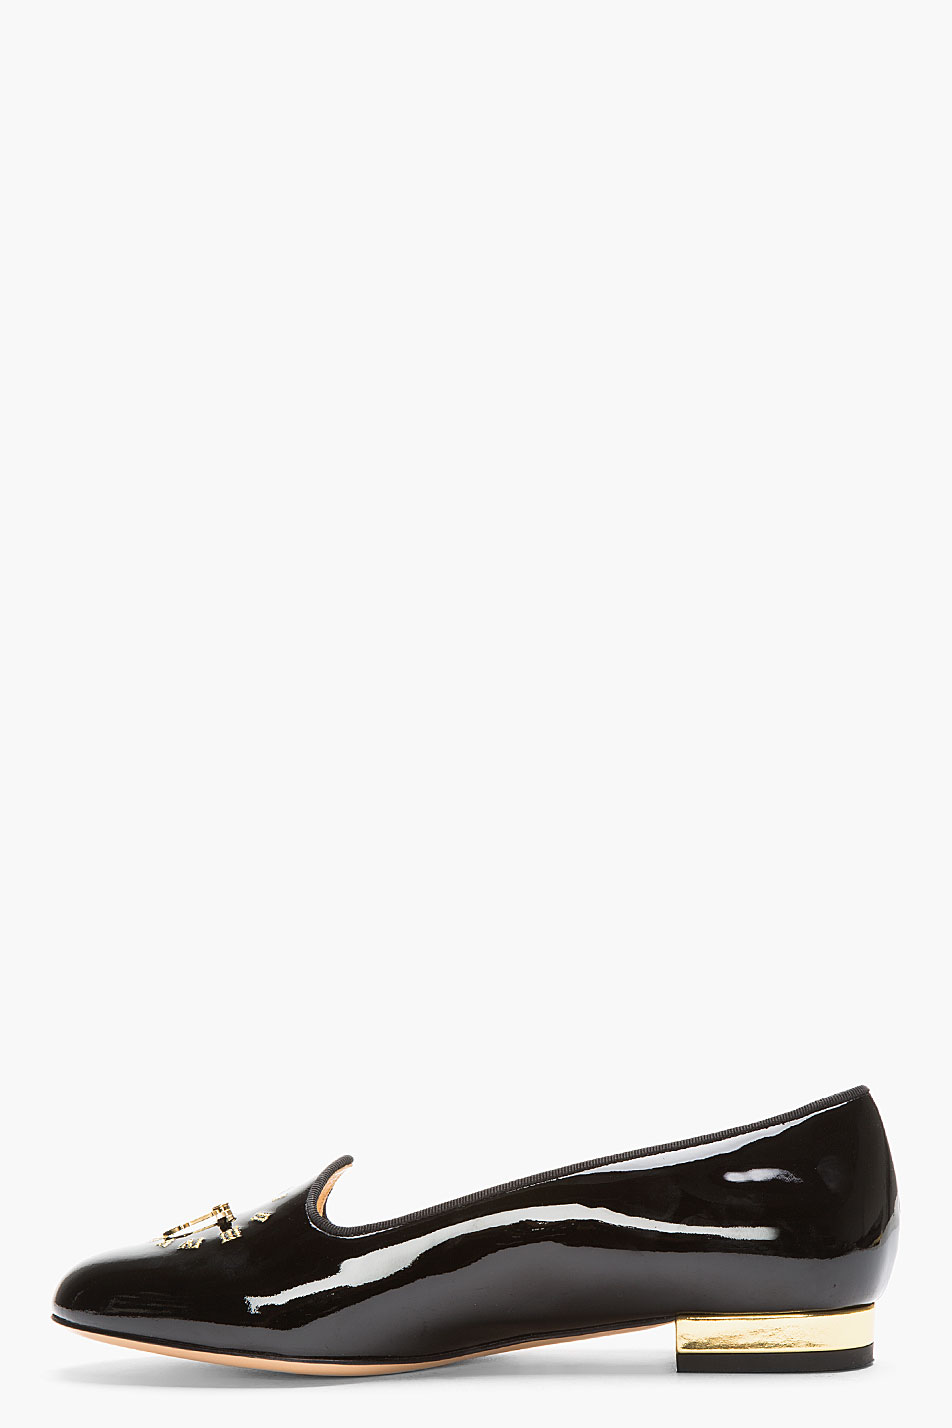 Lyst - Charlotte Olympia Black Patent Leather Fashionably Late Flats in ...